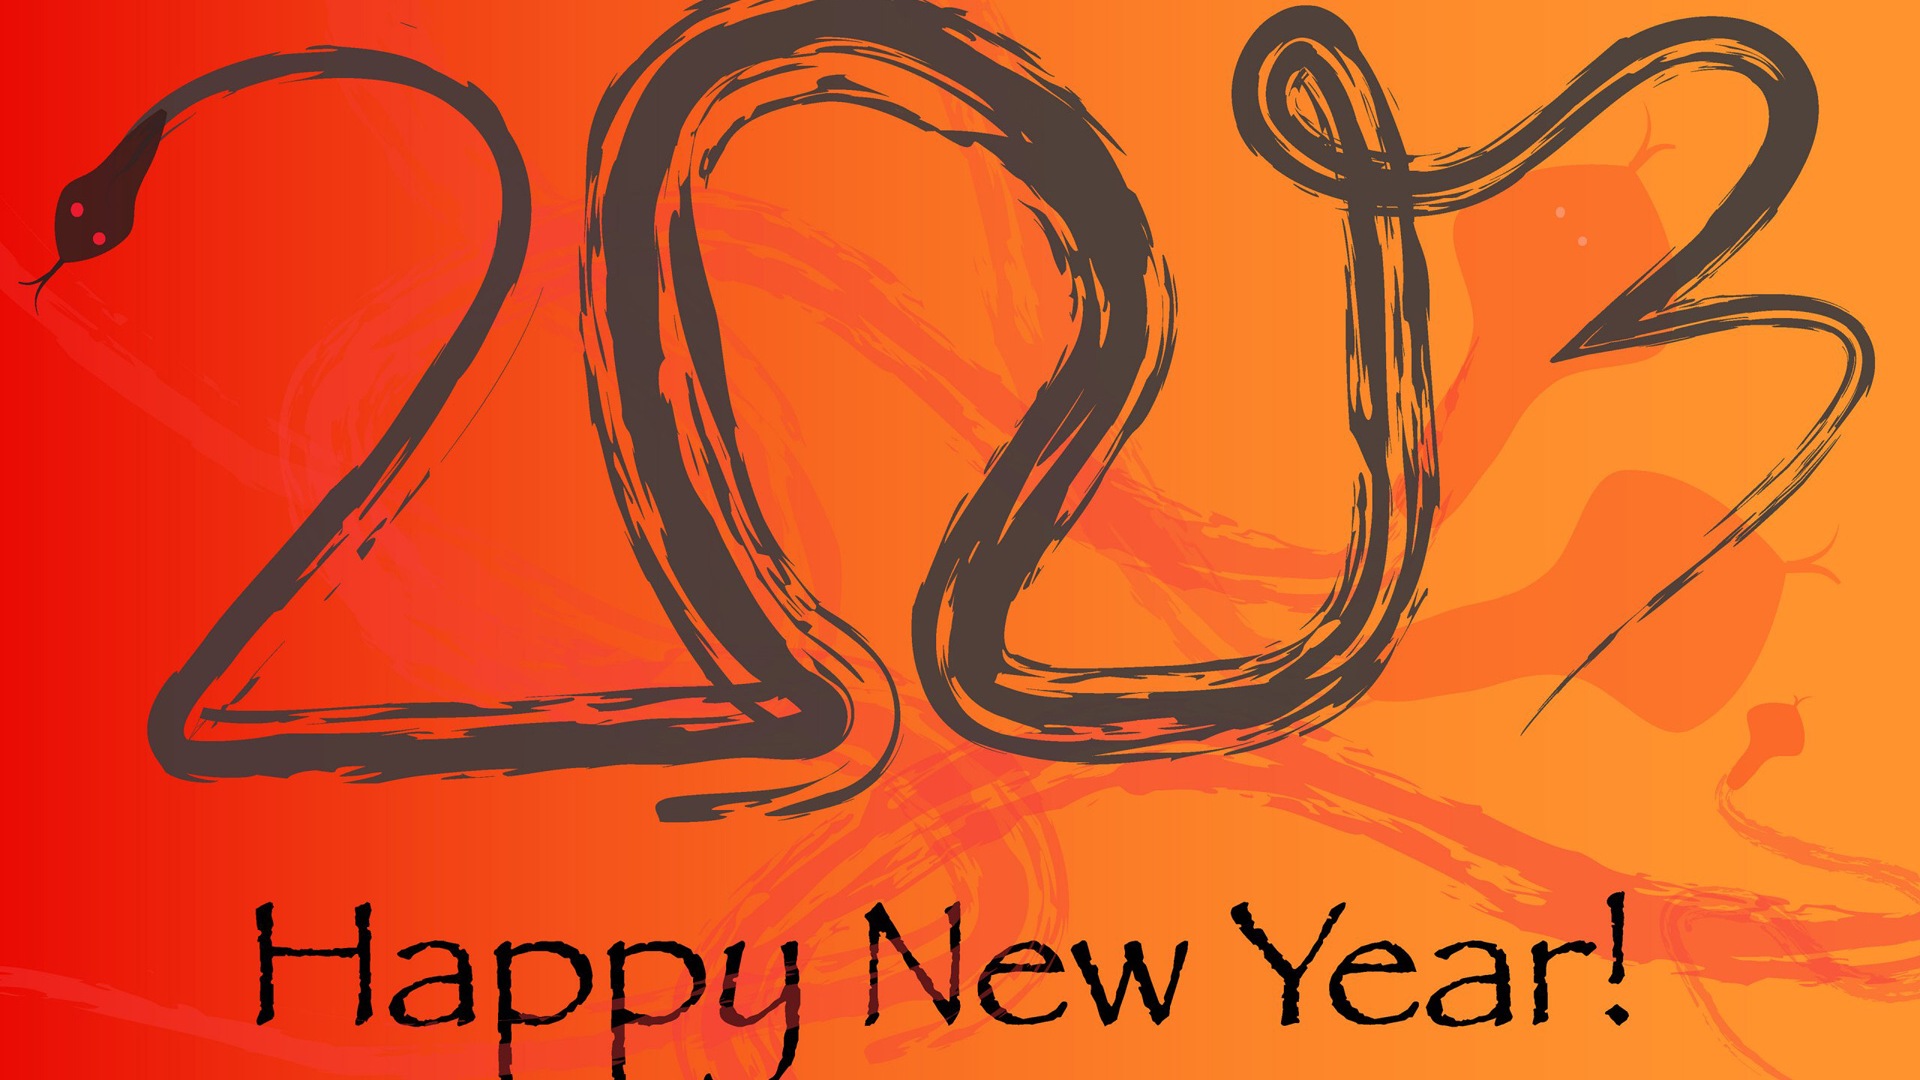 2013 Happy New Year HD wallpapers #11 - 1920x1080